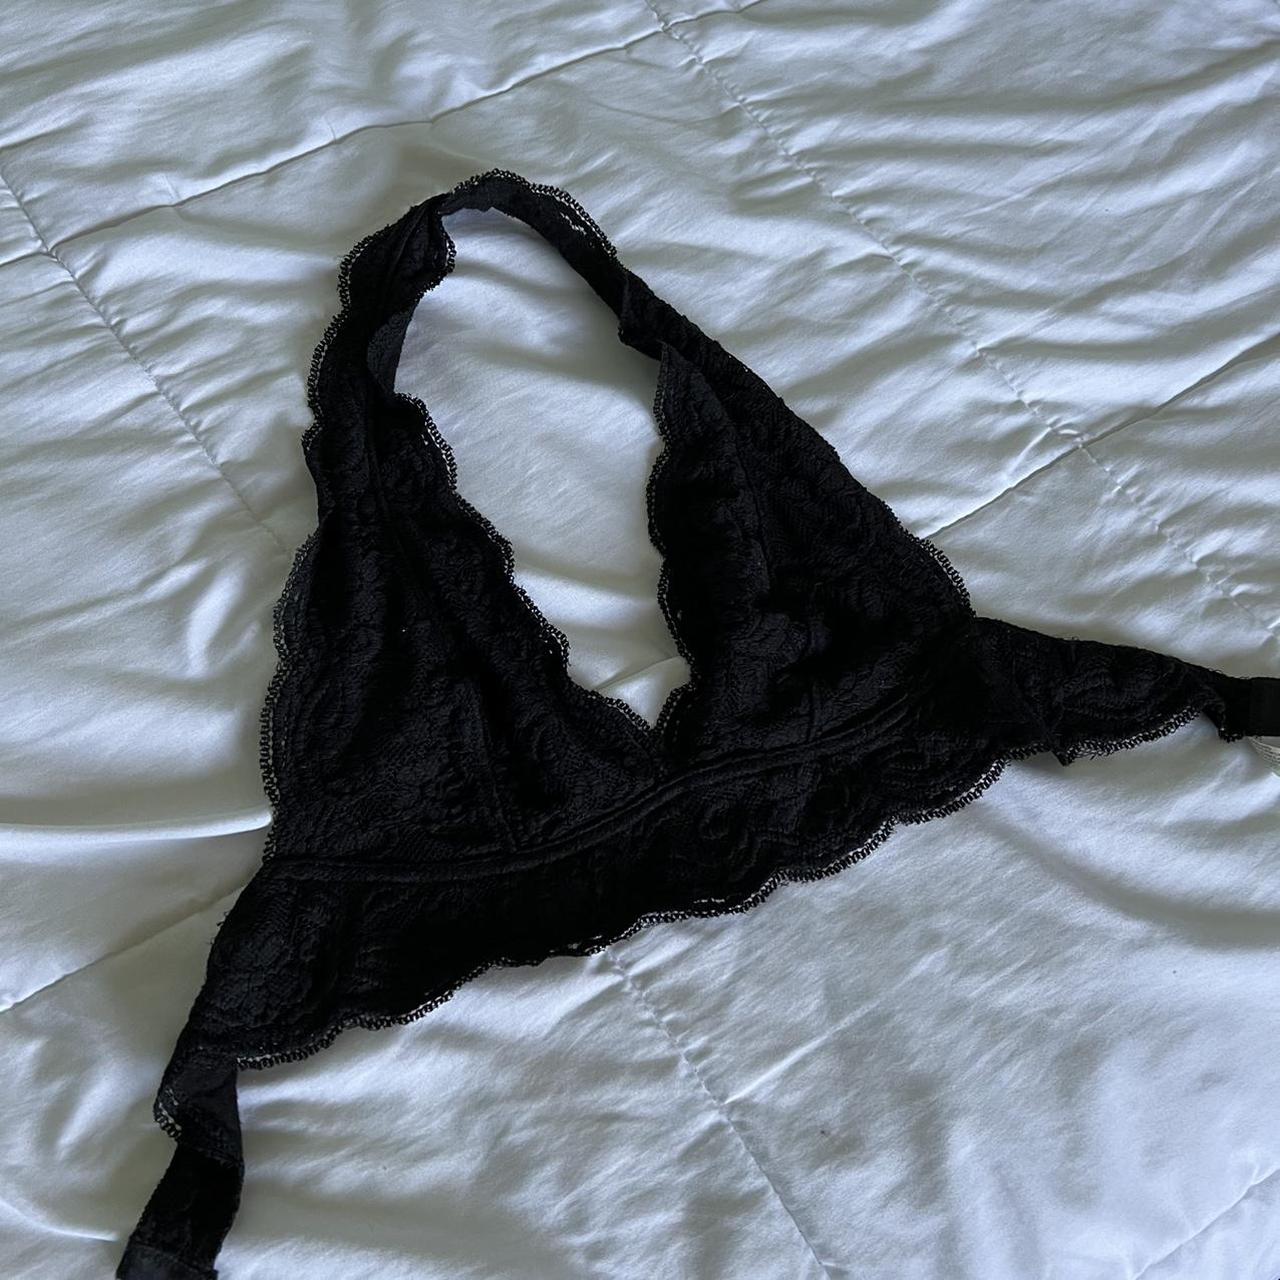 Urban Outfitters Black Lace Halter Bralette.